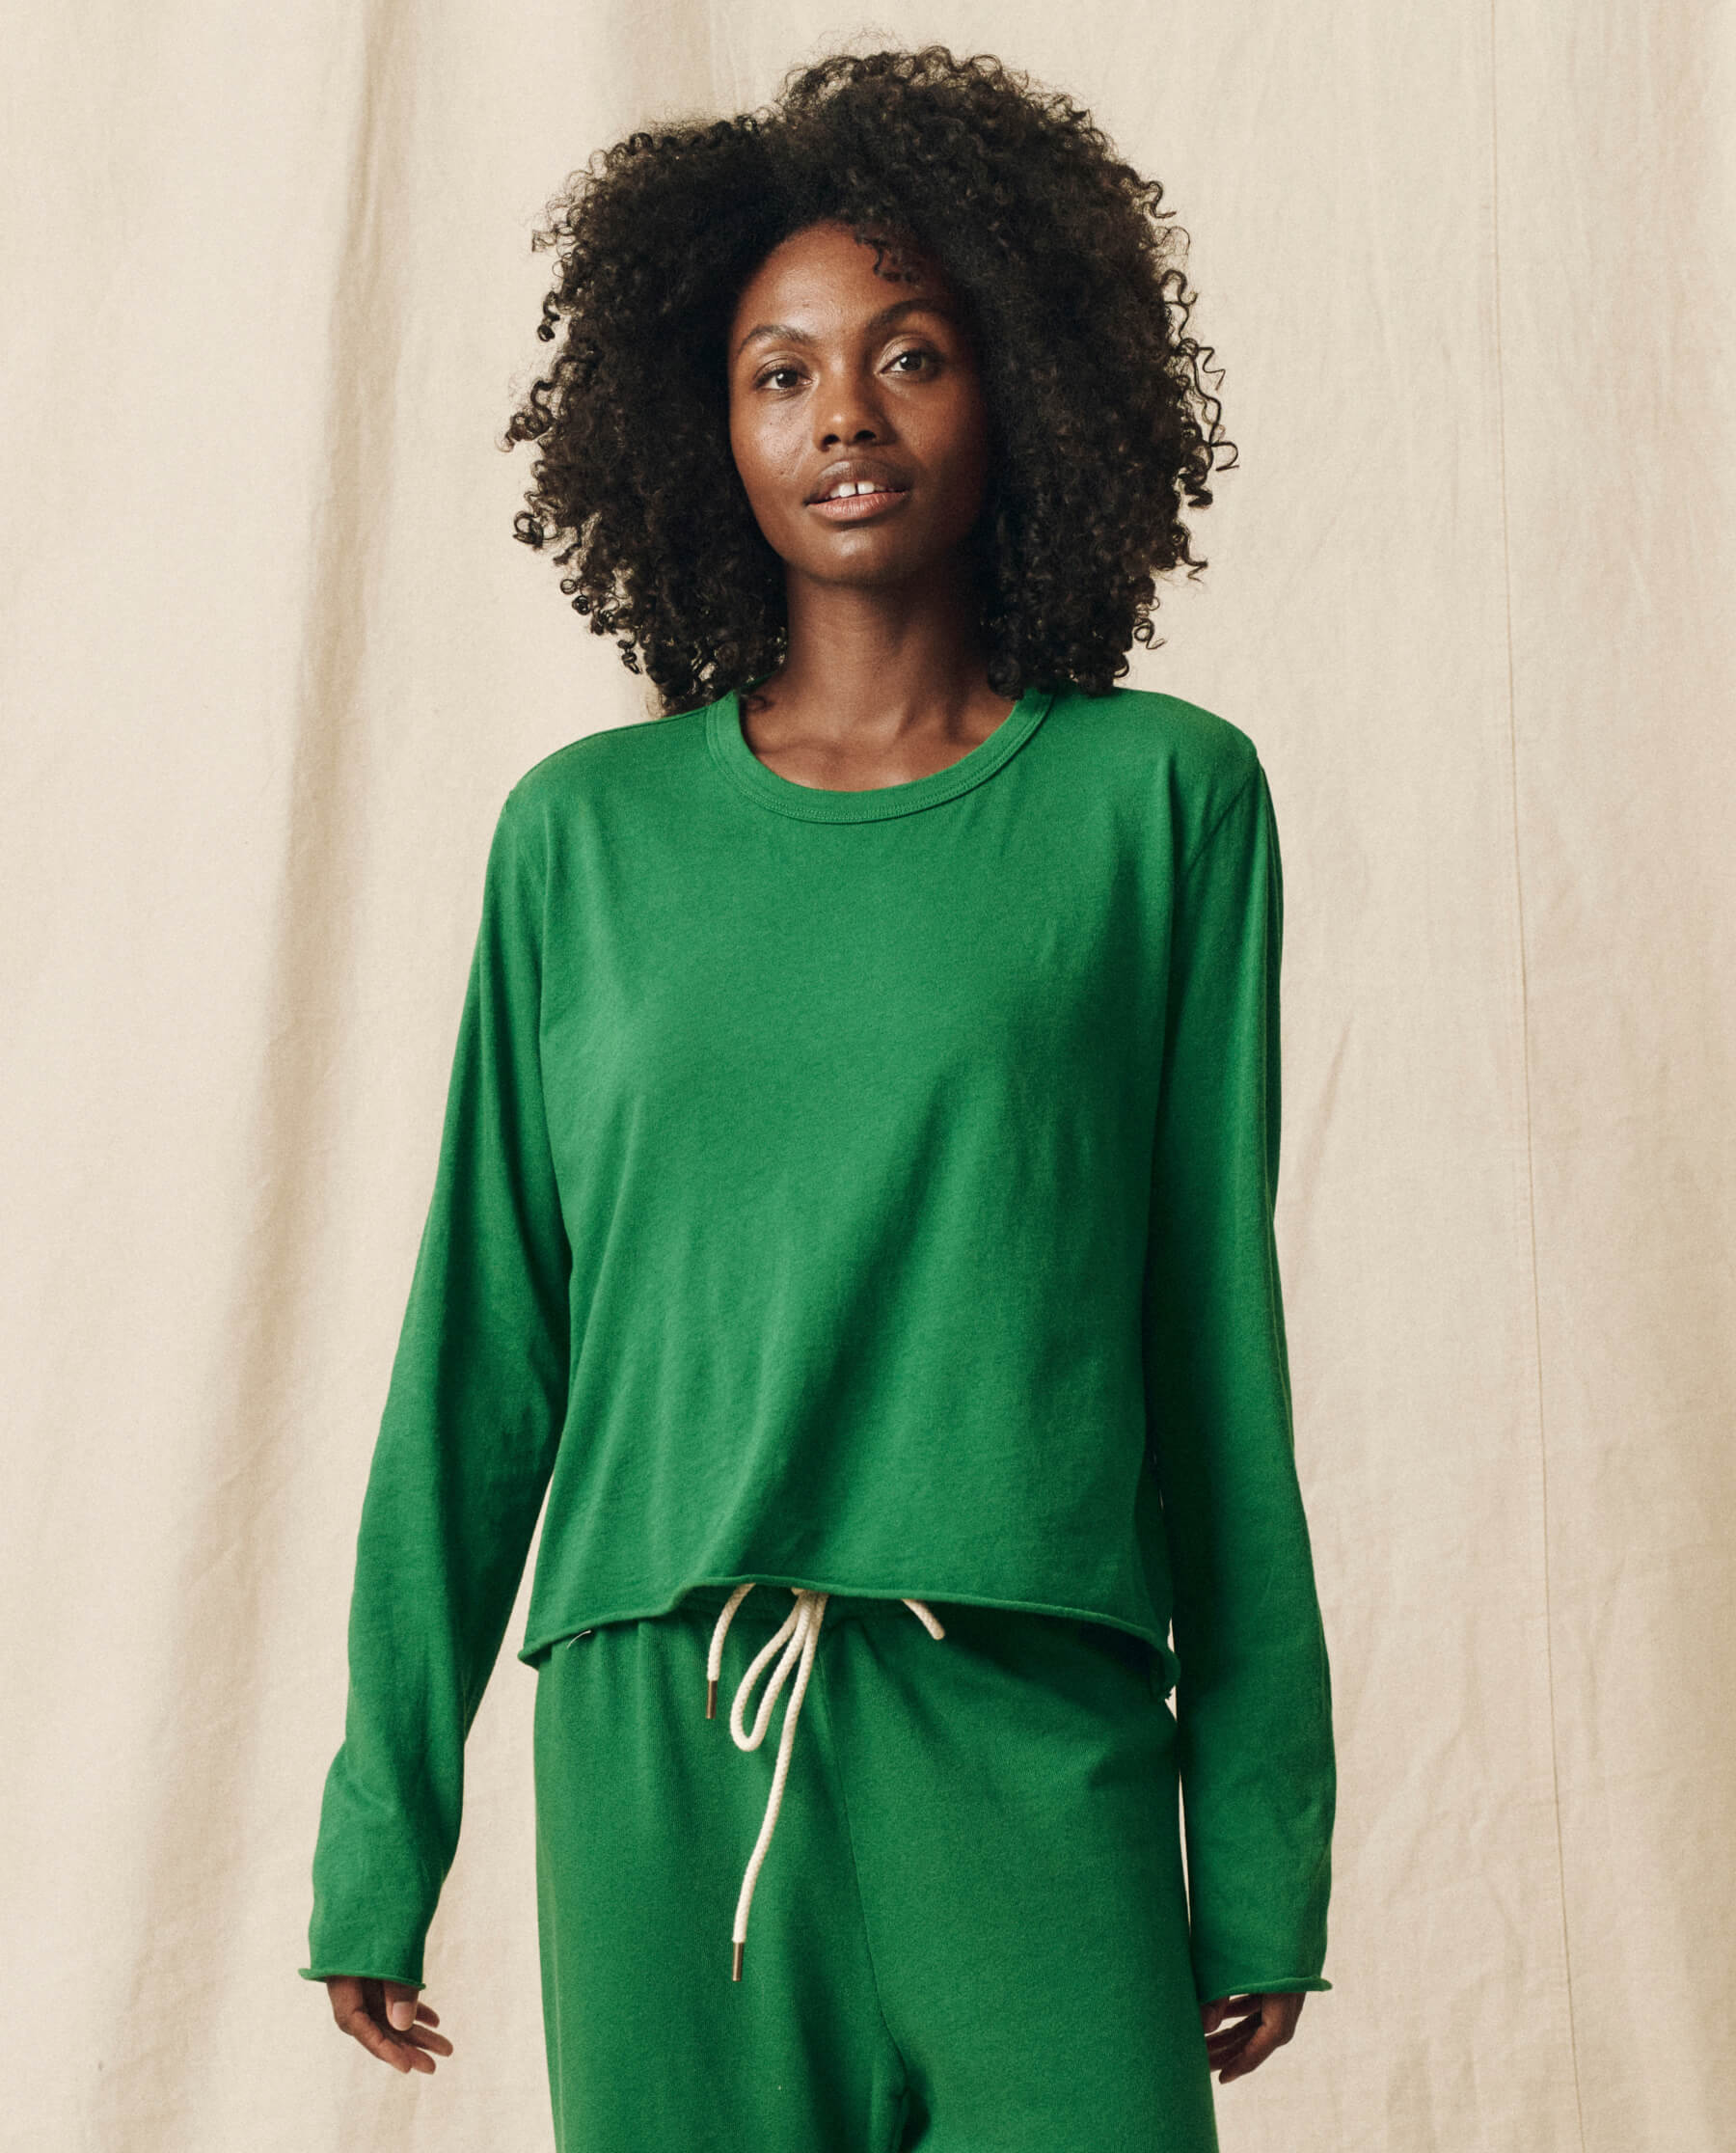 The Long Sleeve Crop Tee. Solid -- Holly Leaf TEES THE GREAT. HOL 23 KNITS